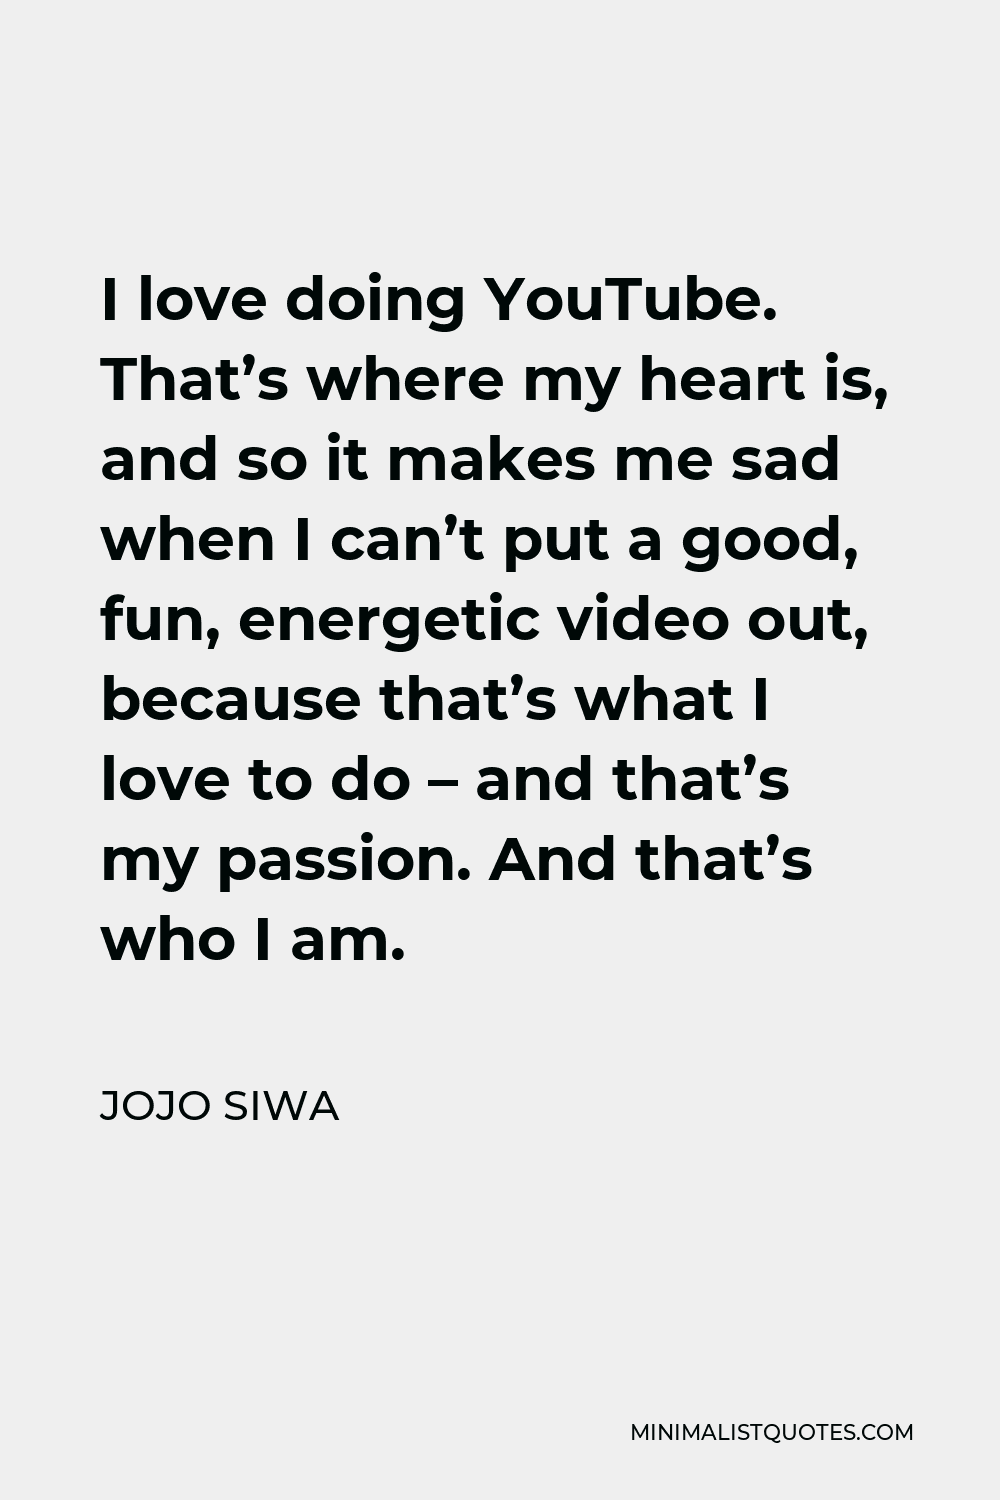 JoJo Siwa Quote - I love doing YouTube. That’s where my heart is, and so it makes me sad when I can’t put a good, fun, energetic video out, because that’s what I love to do – and that’s my passion. And that’s who I am.